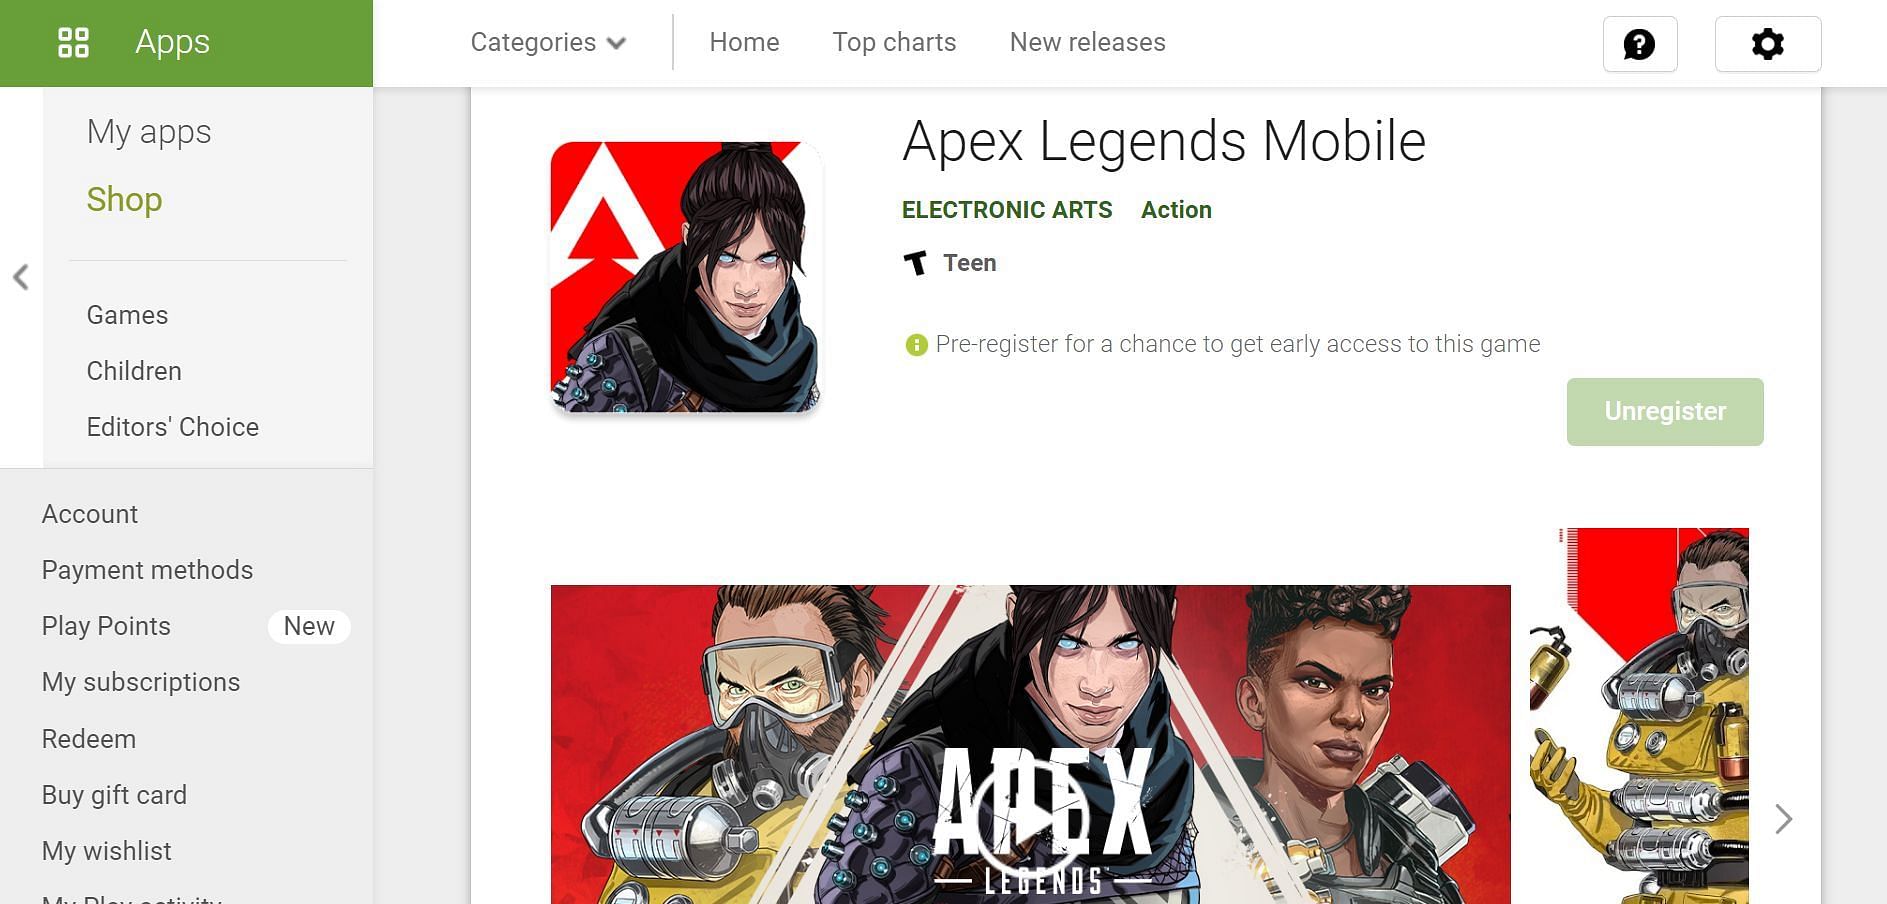 Apex legends Mobile on Androids (Image via Google Play Store)